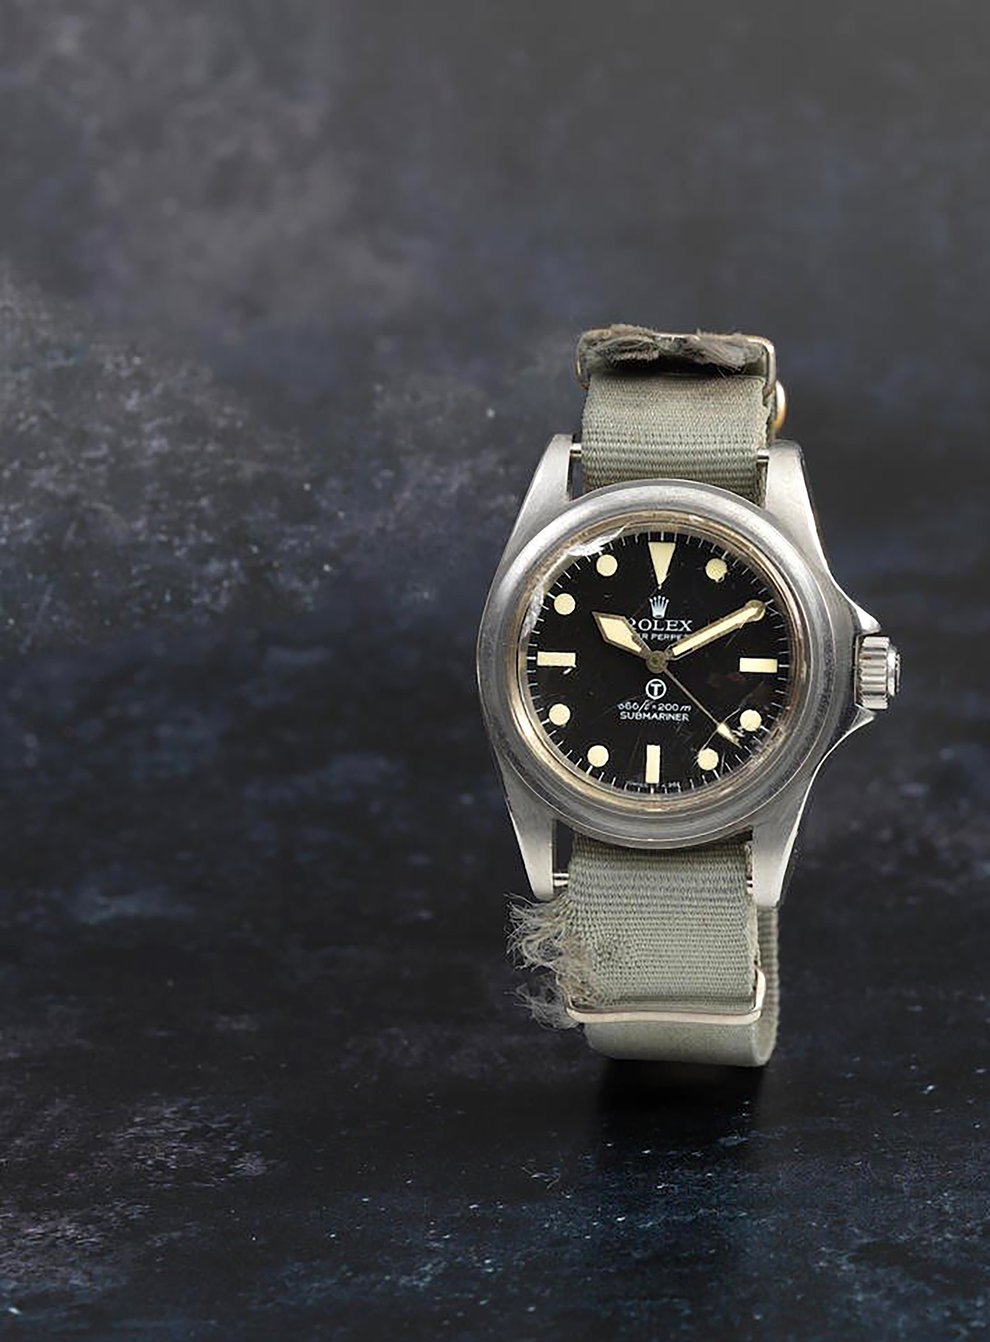 An ultra-rare Rolex has sold for £155,000 at an auction (Nick Brewster/PA)